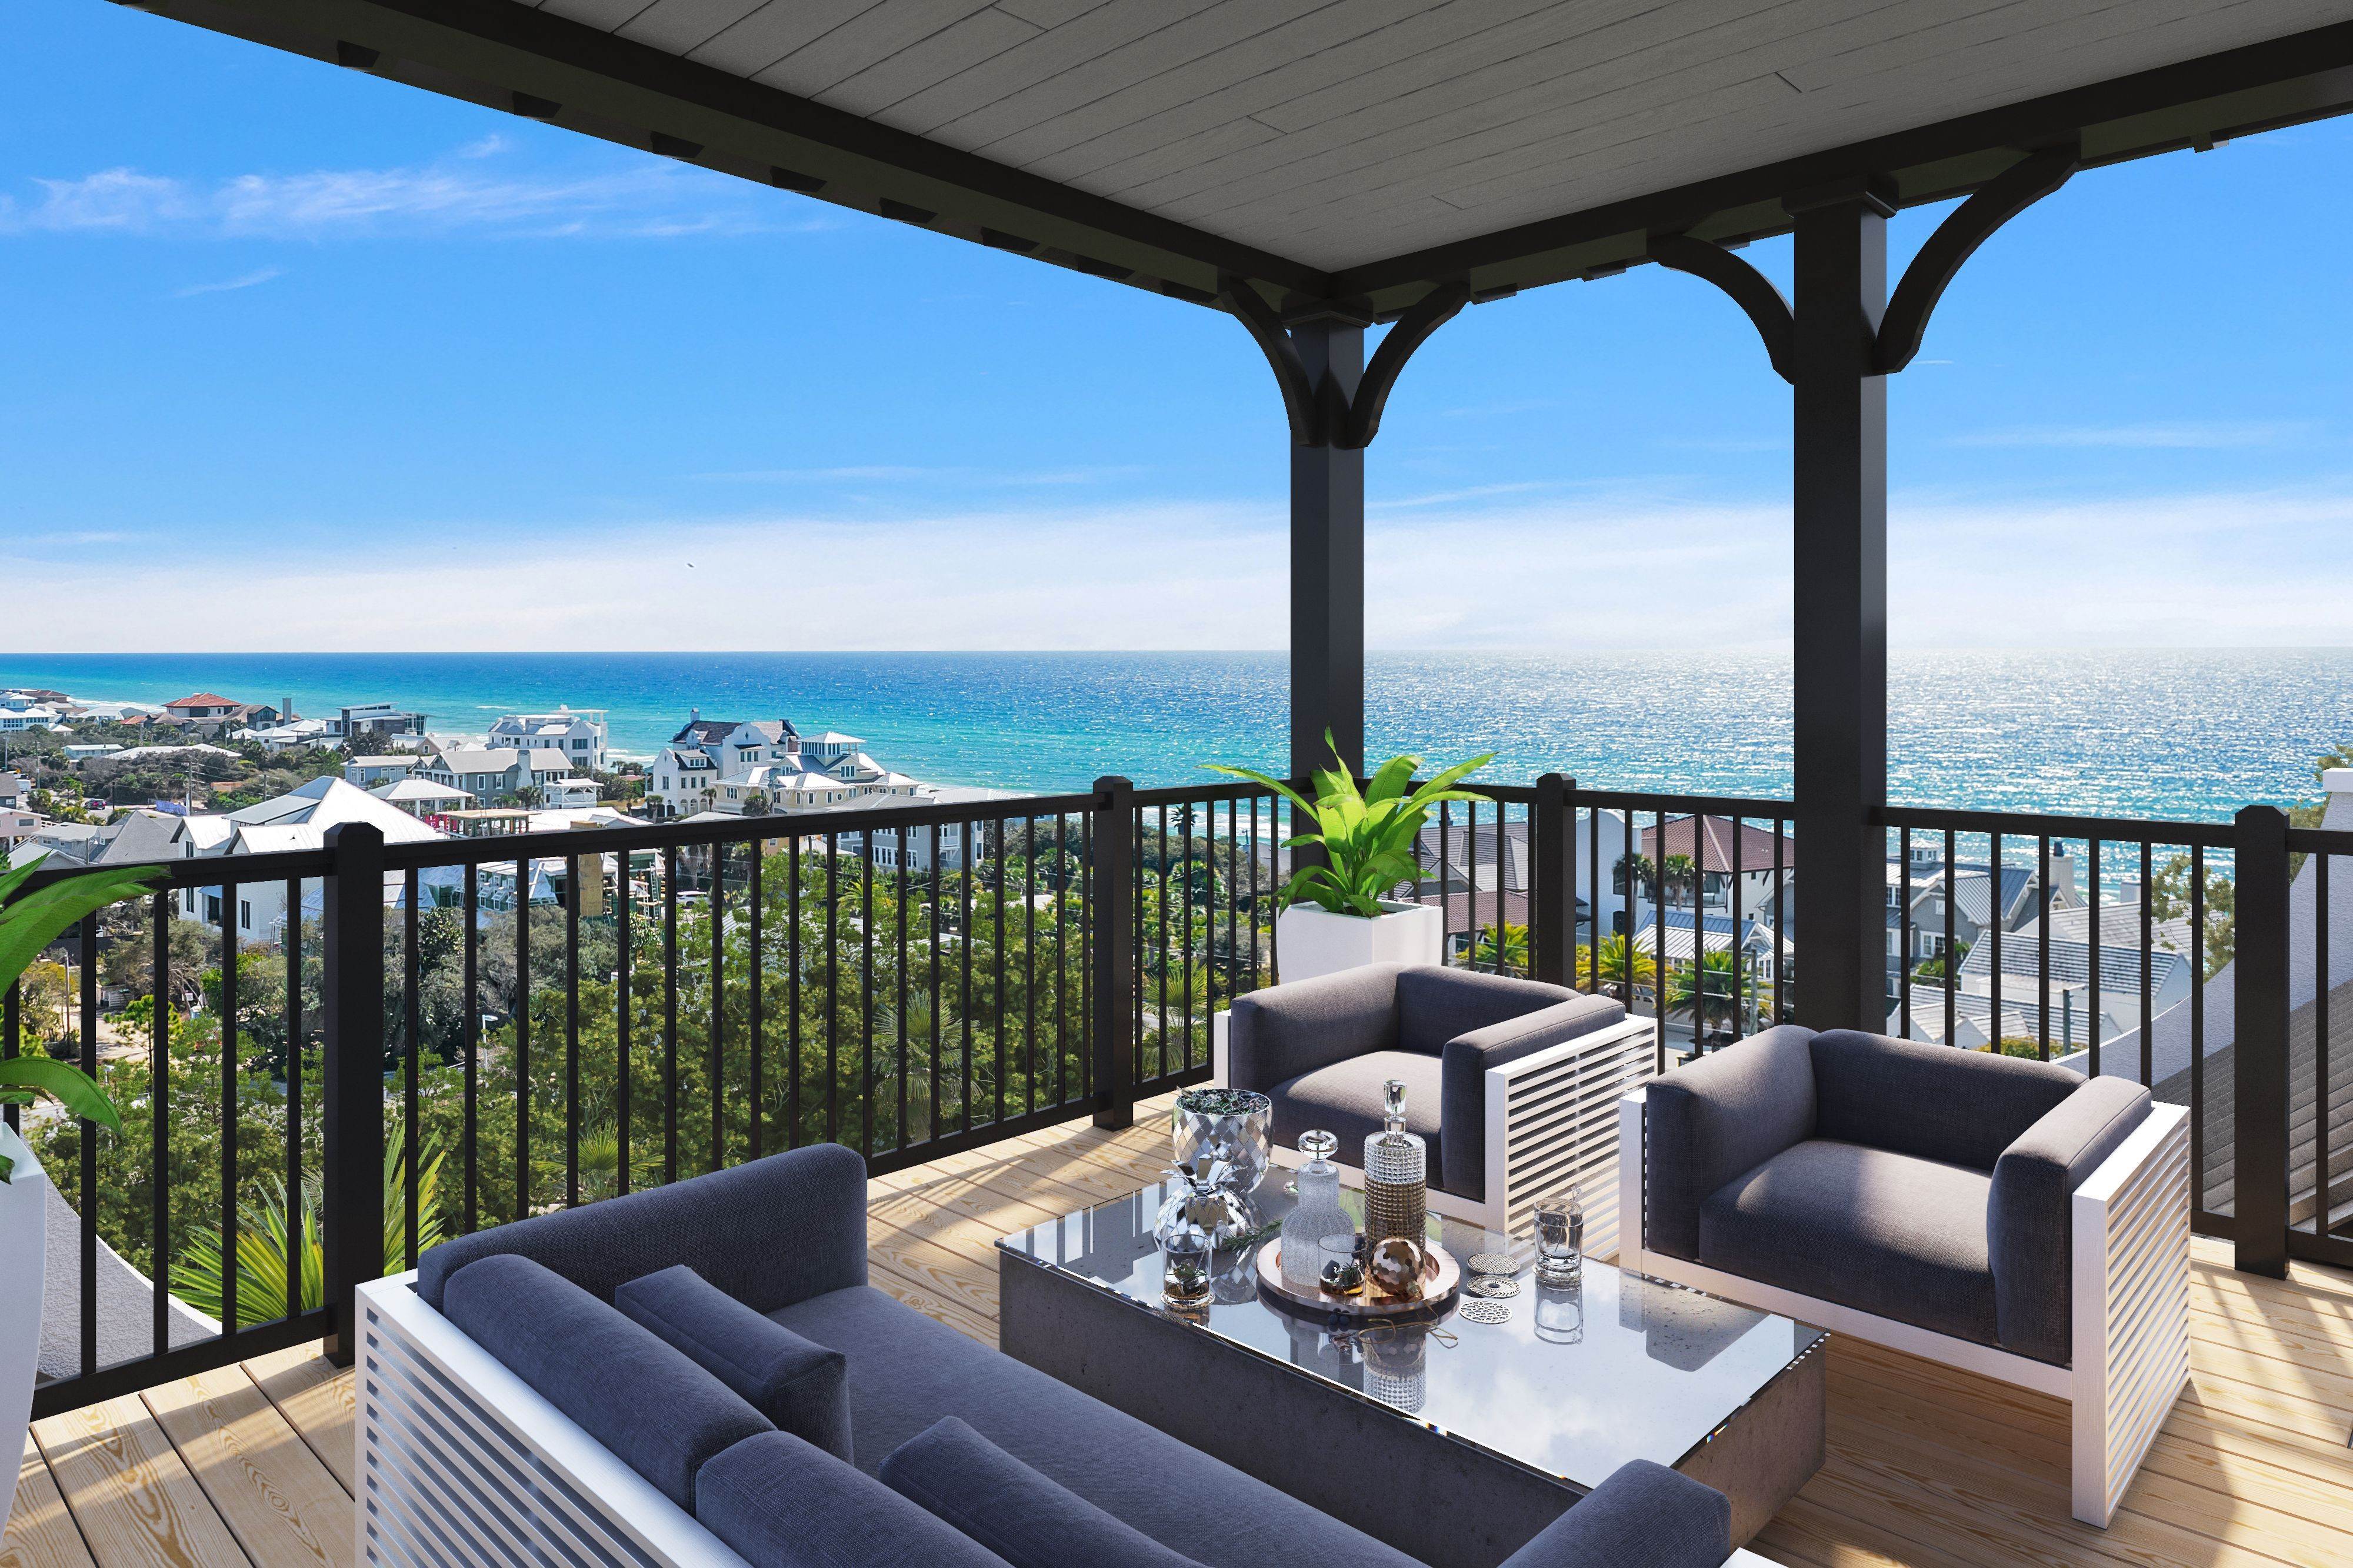 Single Family Homes for Sale at Unique Coastal Ownership Experience In Highly-Anticipated Seagrove Heights 46 Gardenia Street Santa Rosa Beach, Florida 32459 United States